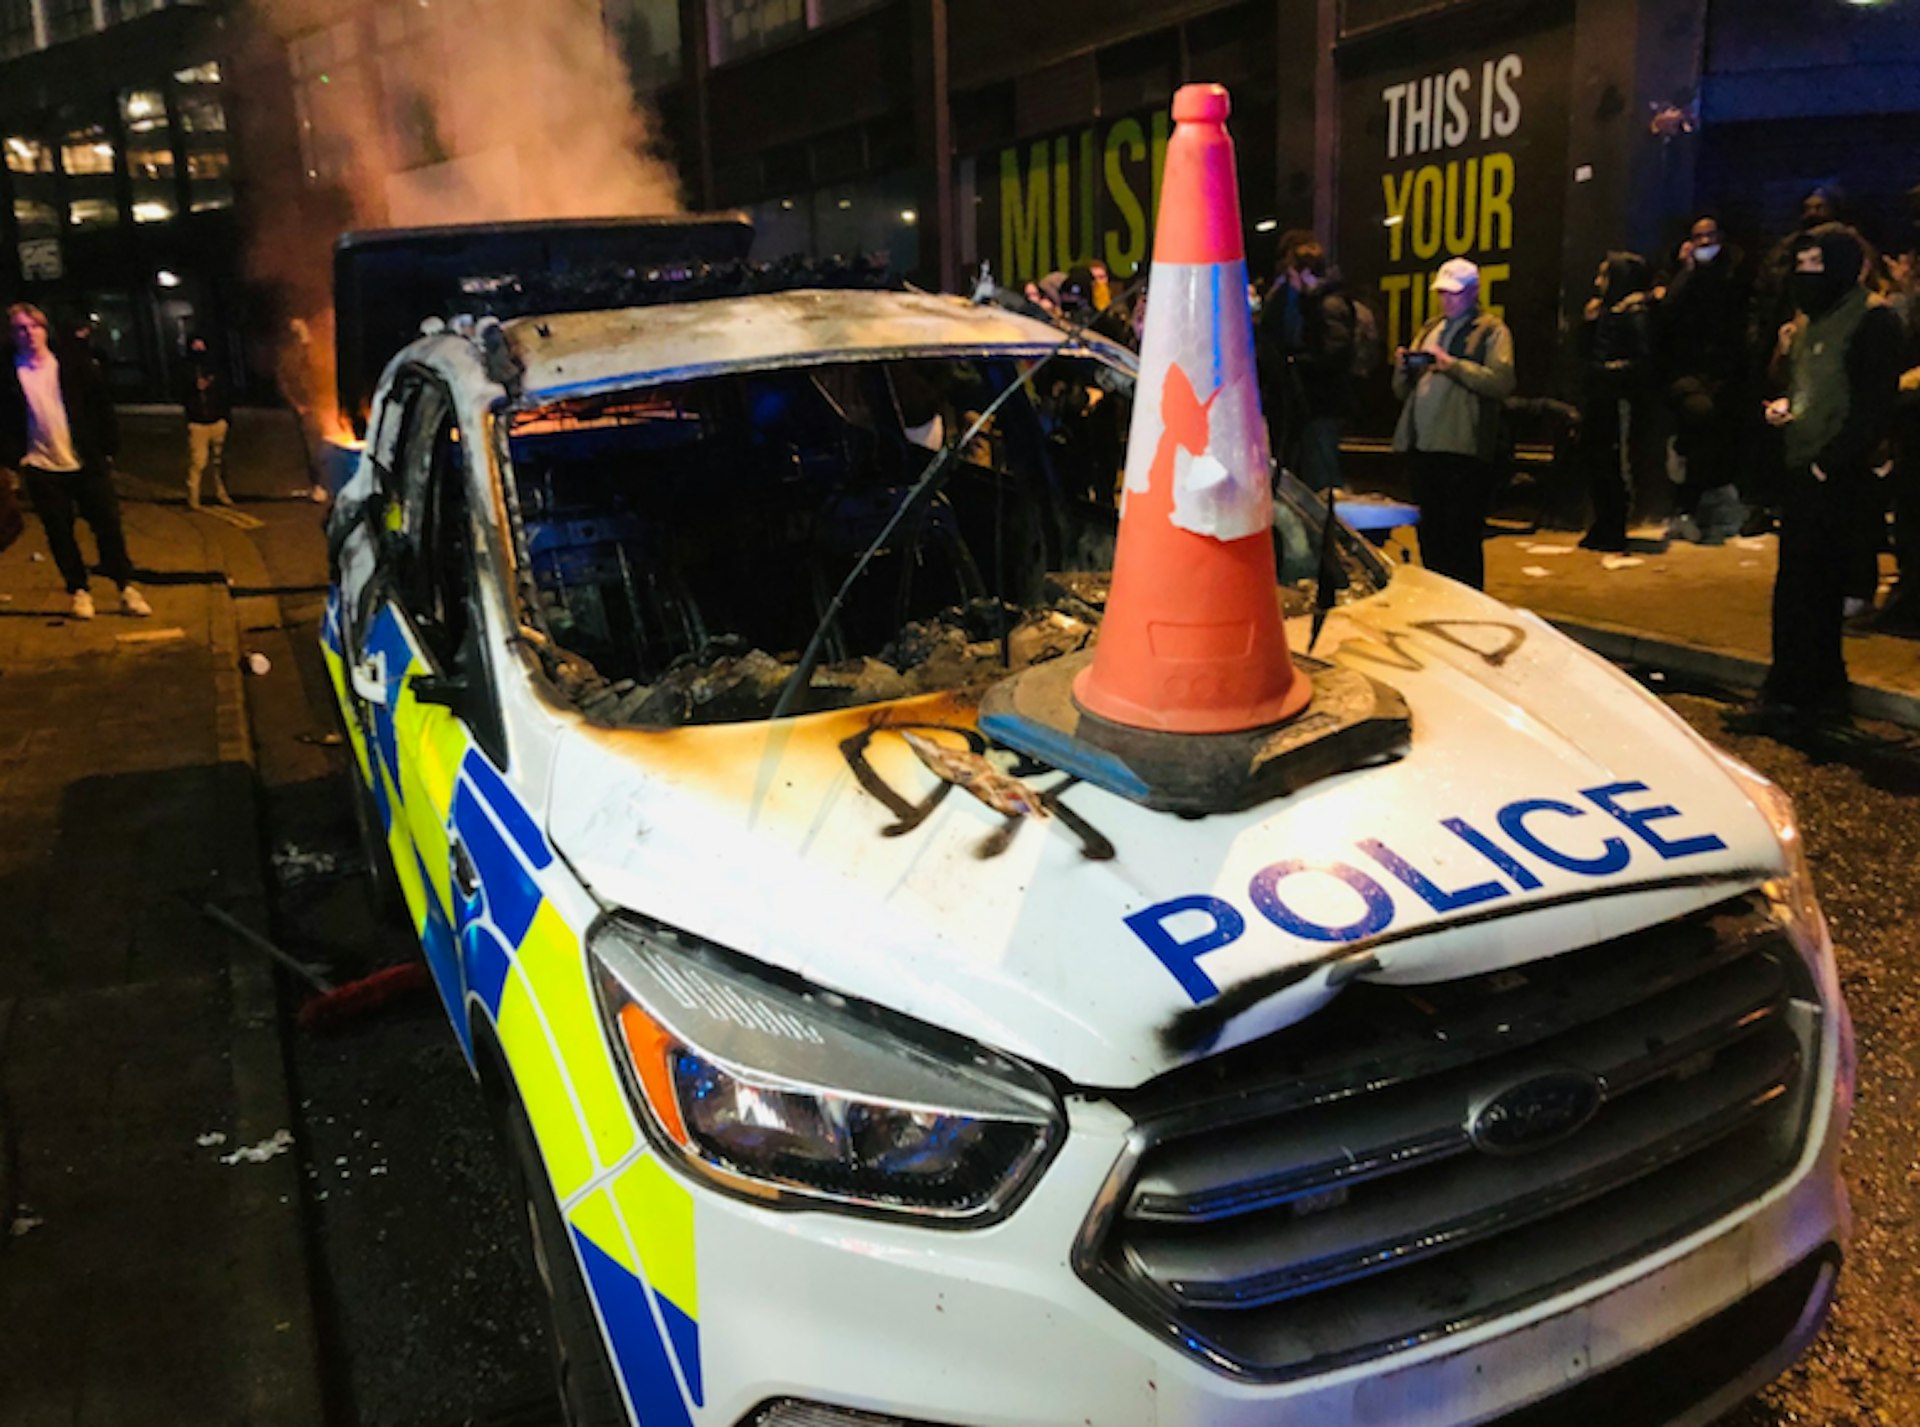 Bristol protests: the full story, told by those who were there